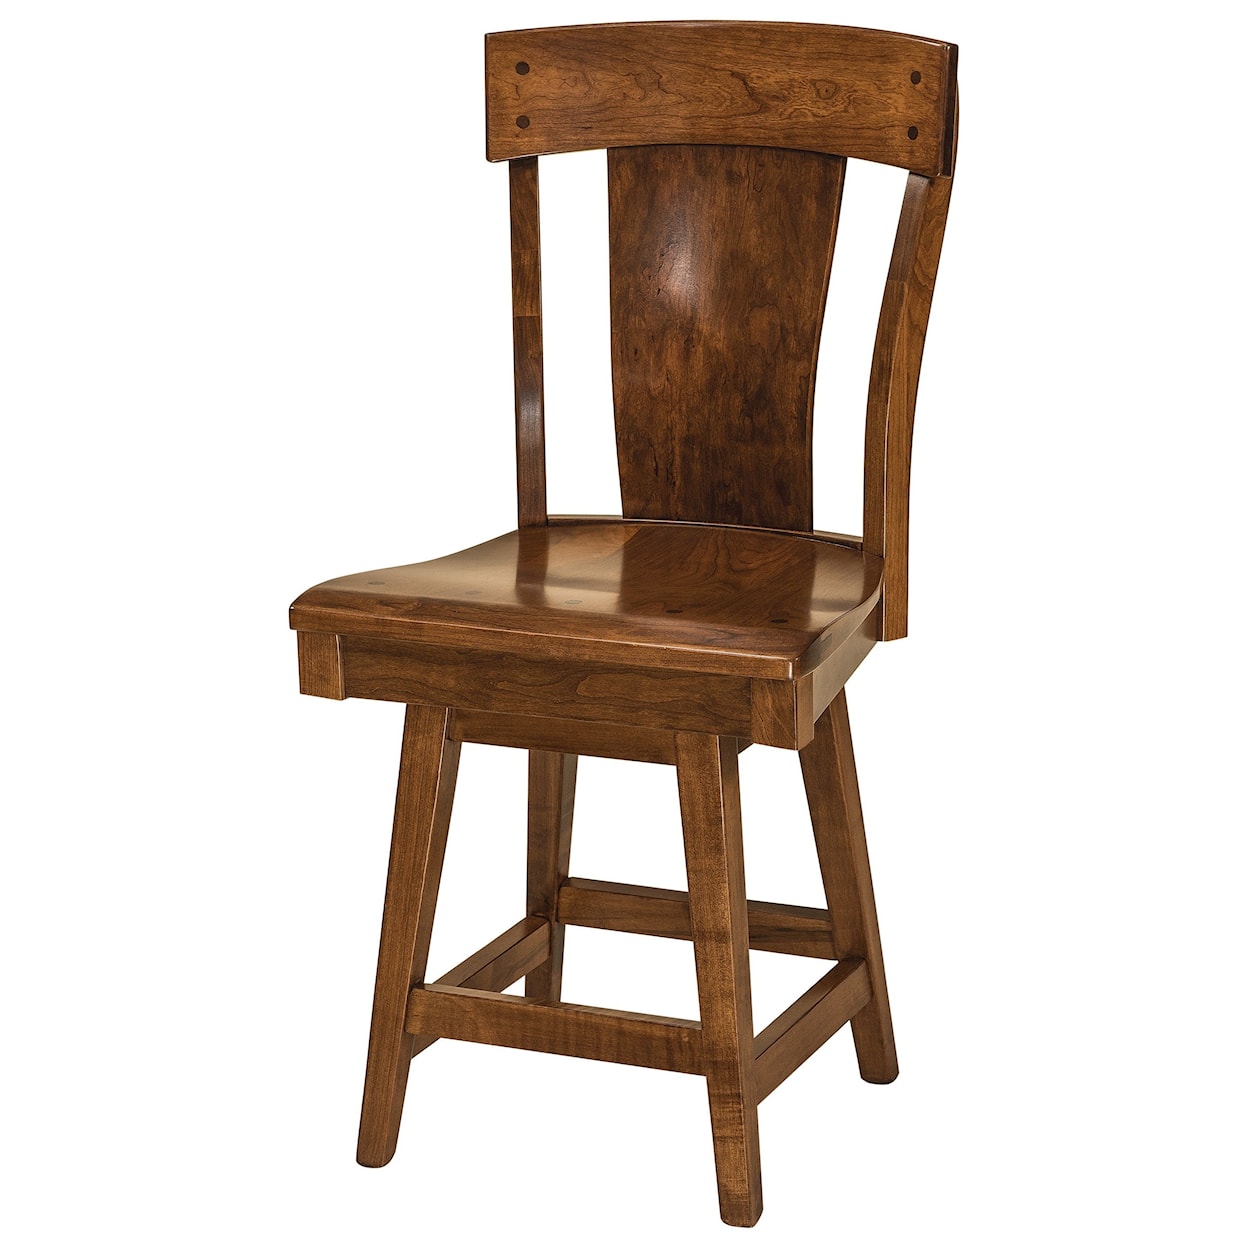 F&N Woodworking Lacombe Swivel Counter Height Stool - Fabric Seat